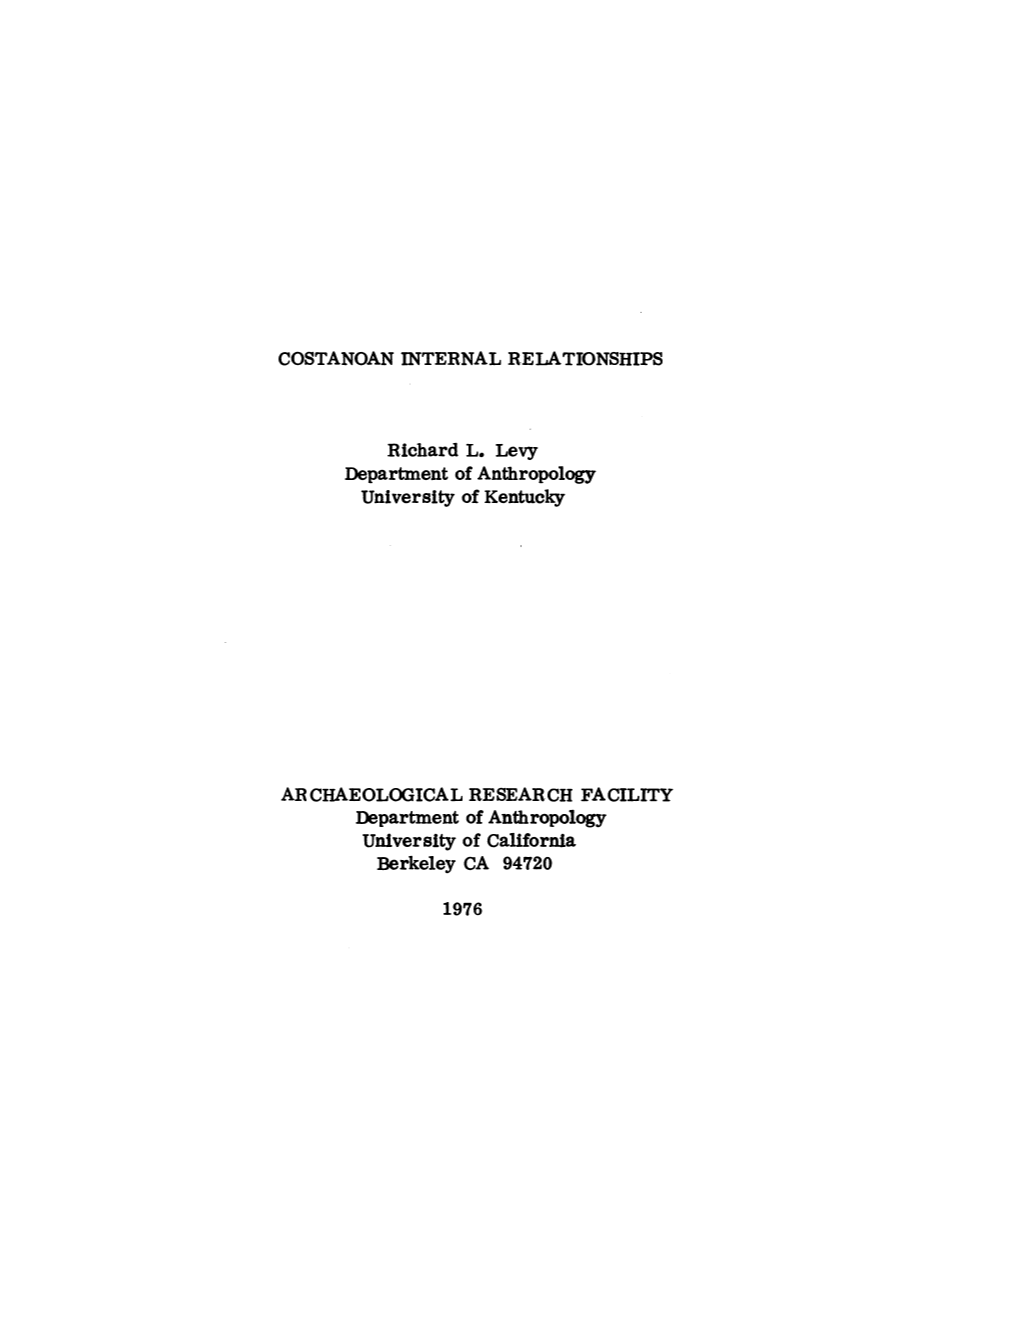 Department of Anthropology University of California Berkeley CA 94720 1976 TABLE of CONTENTS